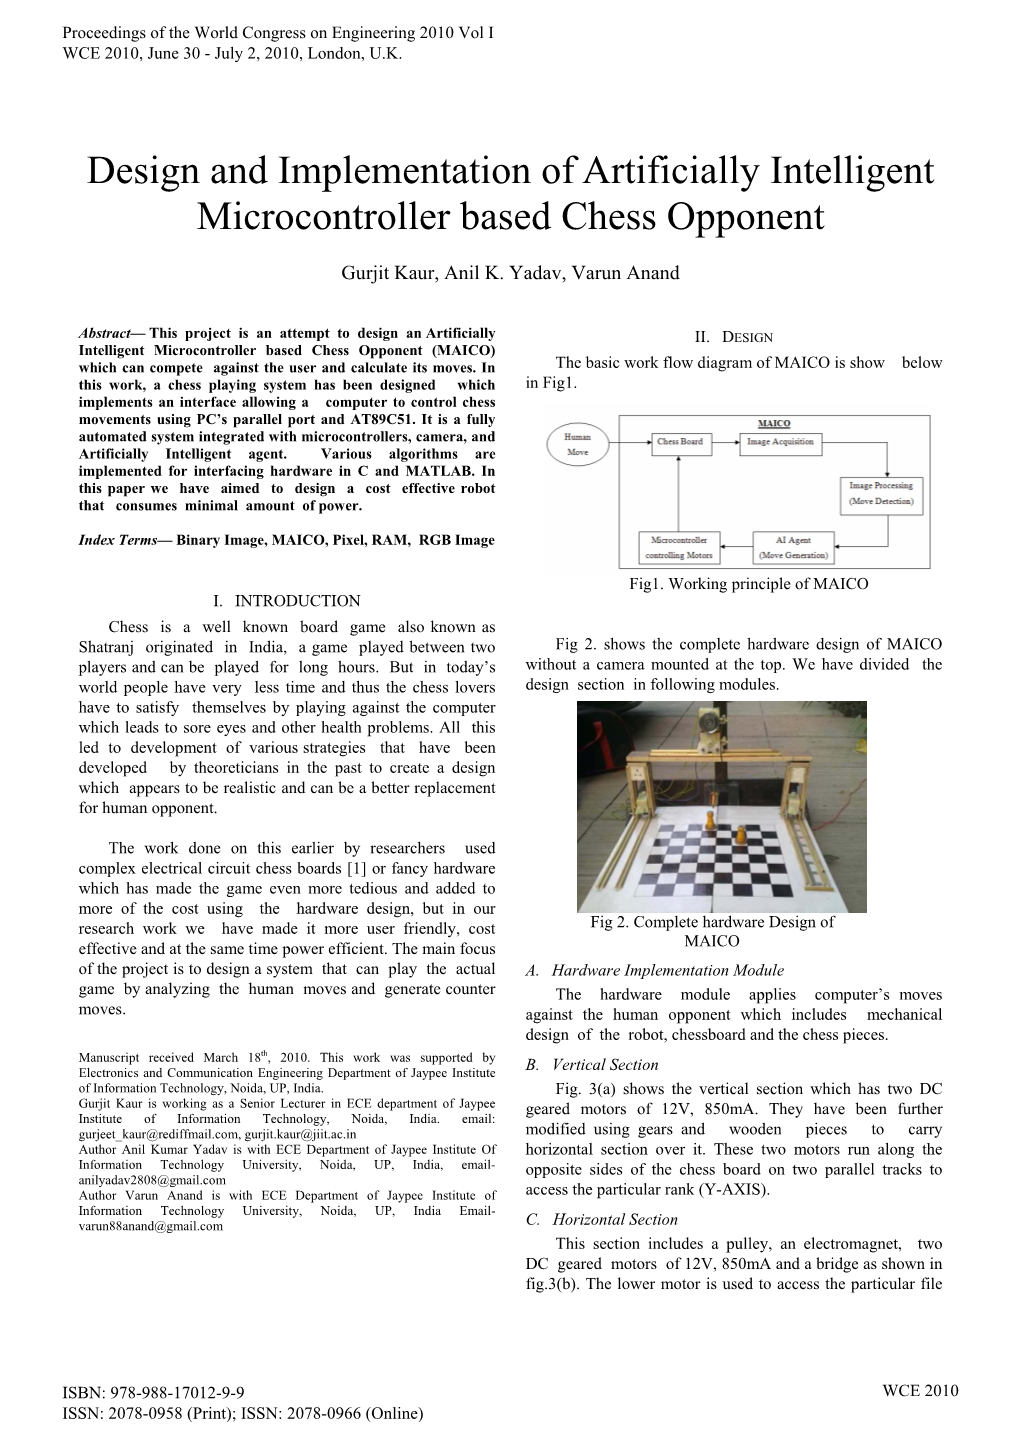 Design and Implementation of Artificially Intelligent Microcontroller Based Chess Opponent